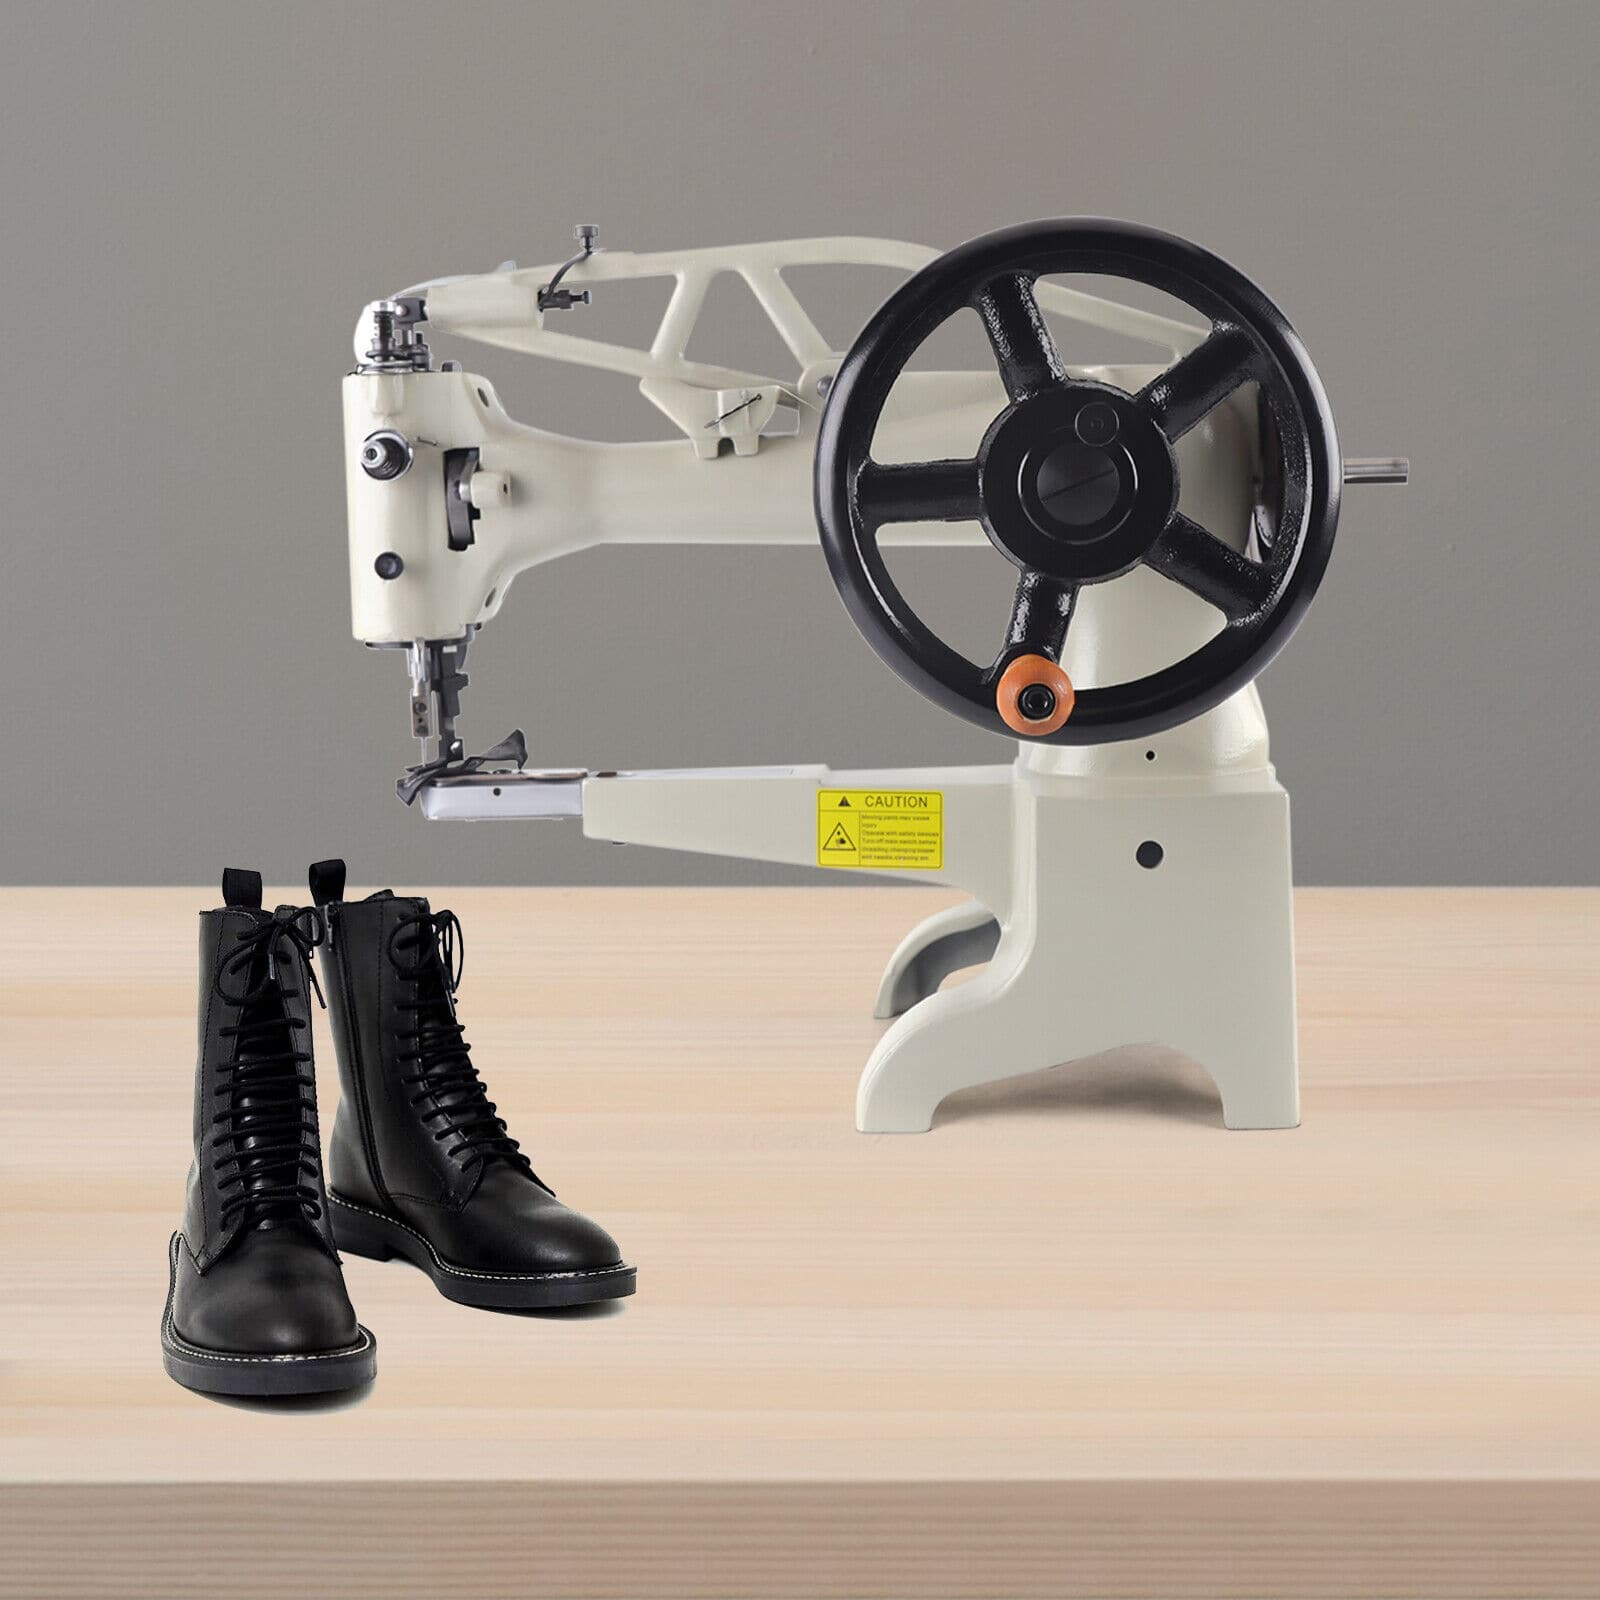 Manual Industrial Leather Shoe Sewing Machine - On Sale - Bed Bath ...